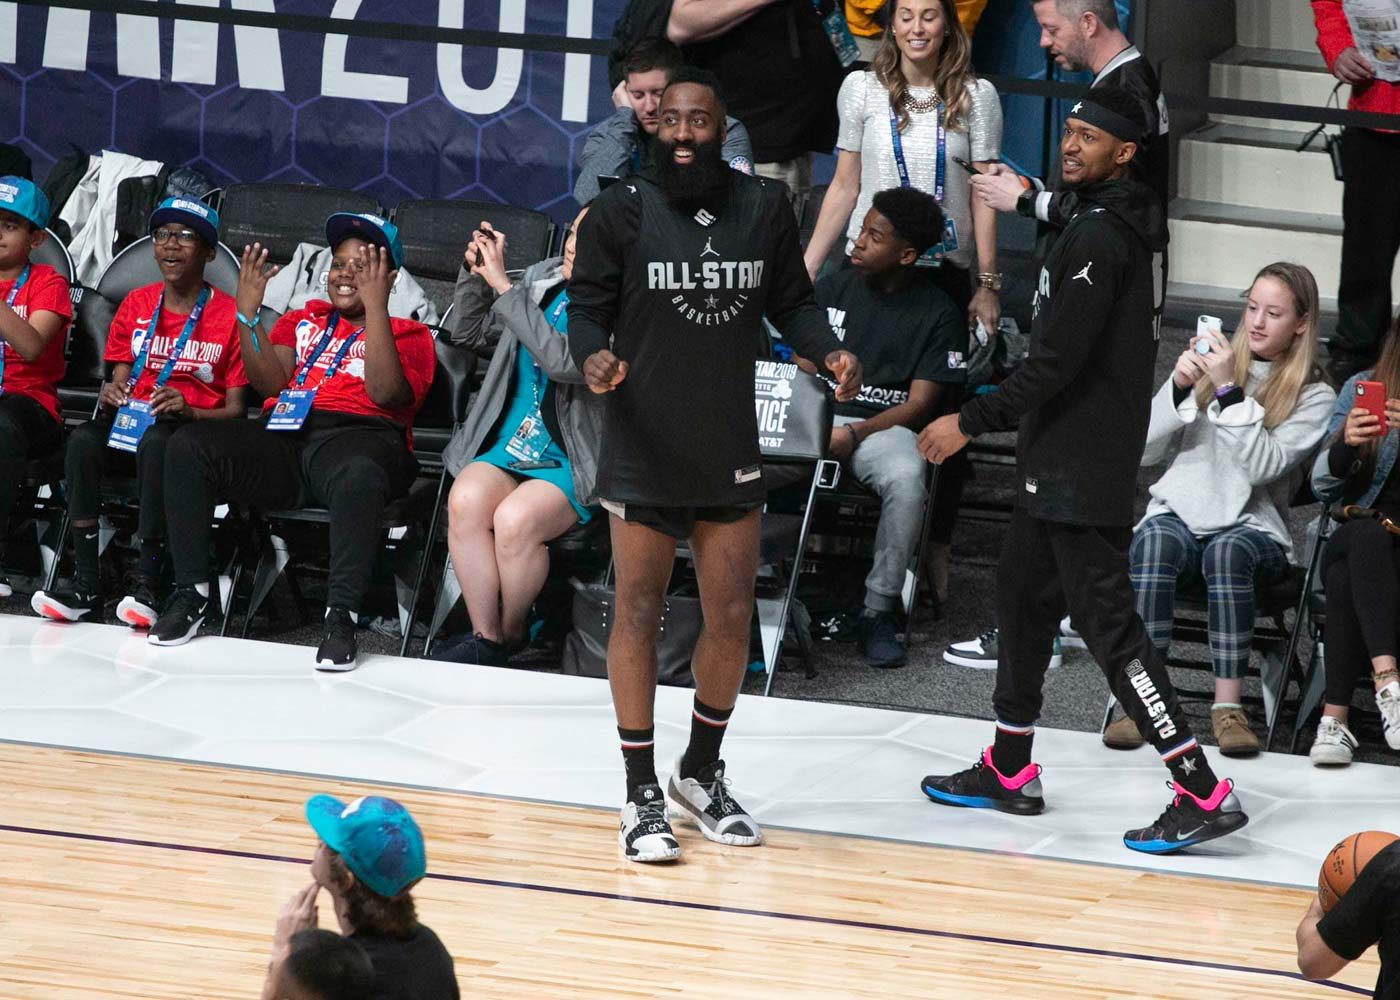 SHORTIE. Reigning MVP James Harden of the Houston Rockets gets asked about his short-shorts, but he just gives a funny shrug and walks away as the crowd laughs.  